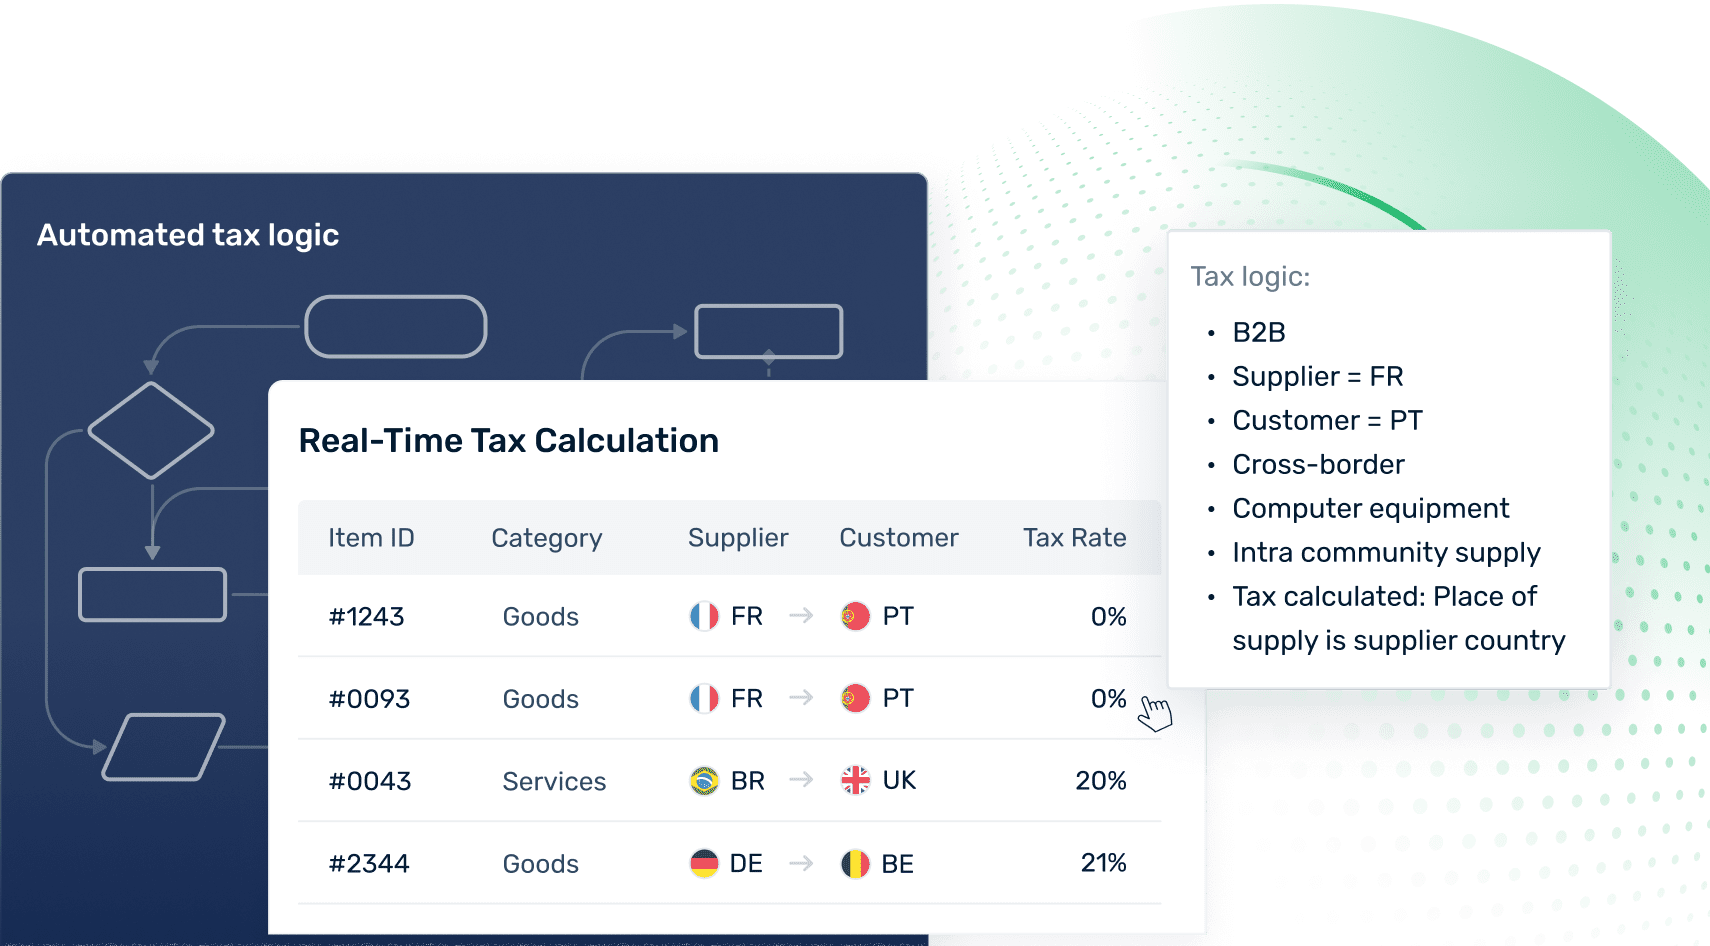 Real-Time Tax Calculation screen